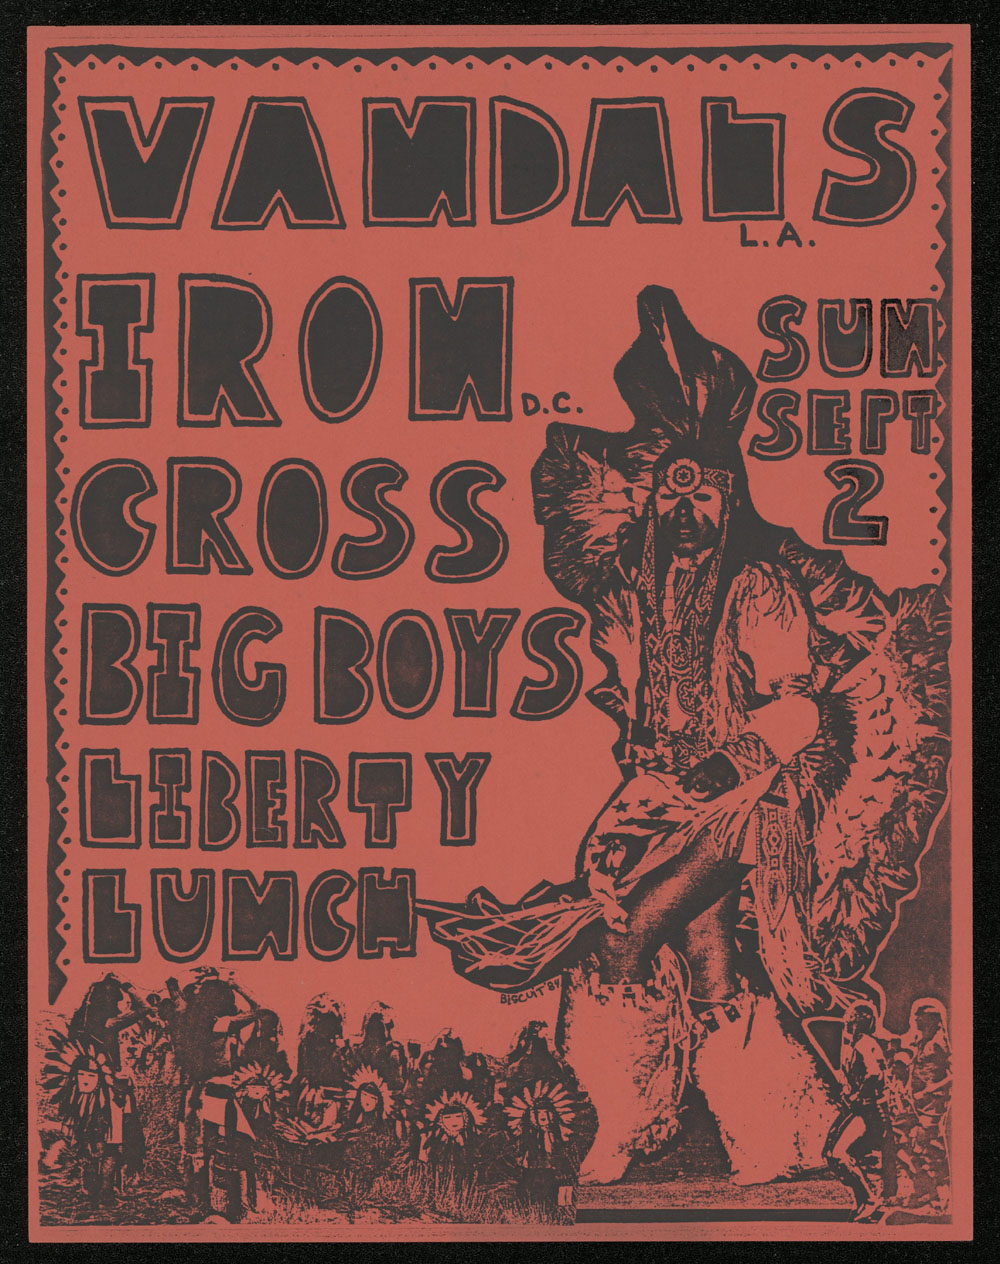 BIG BOYS w/ Vandals, Iron Cross at Liberty Lunch